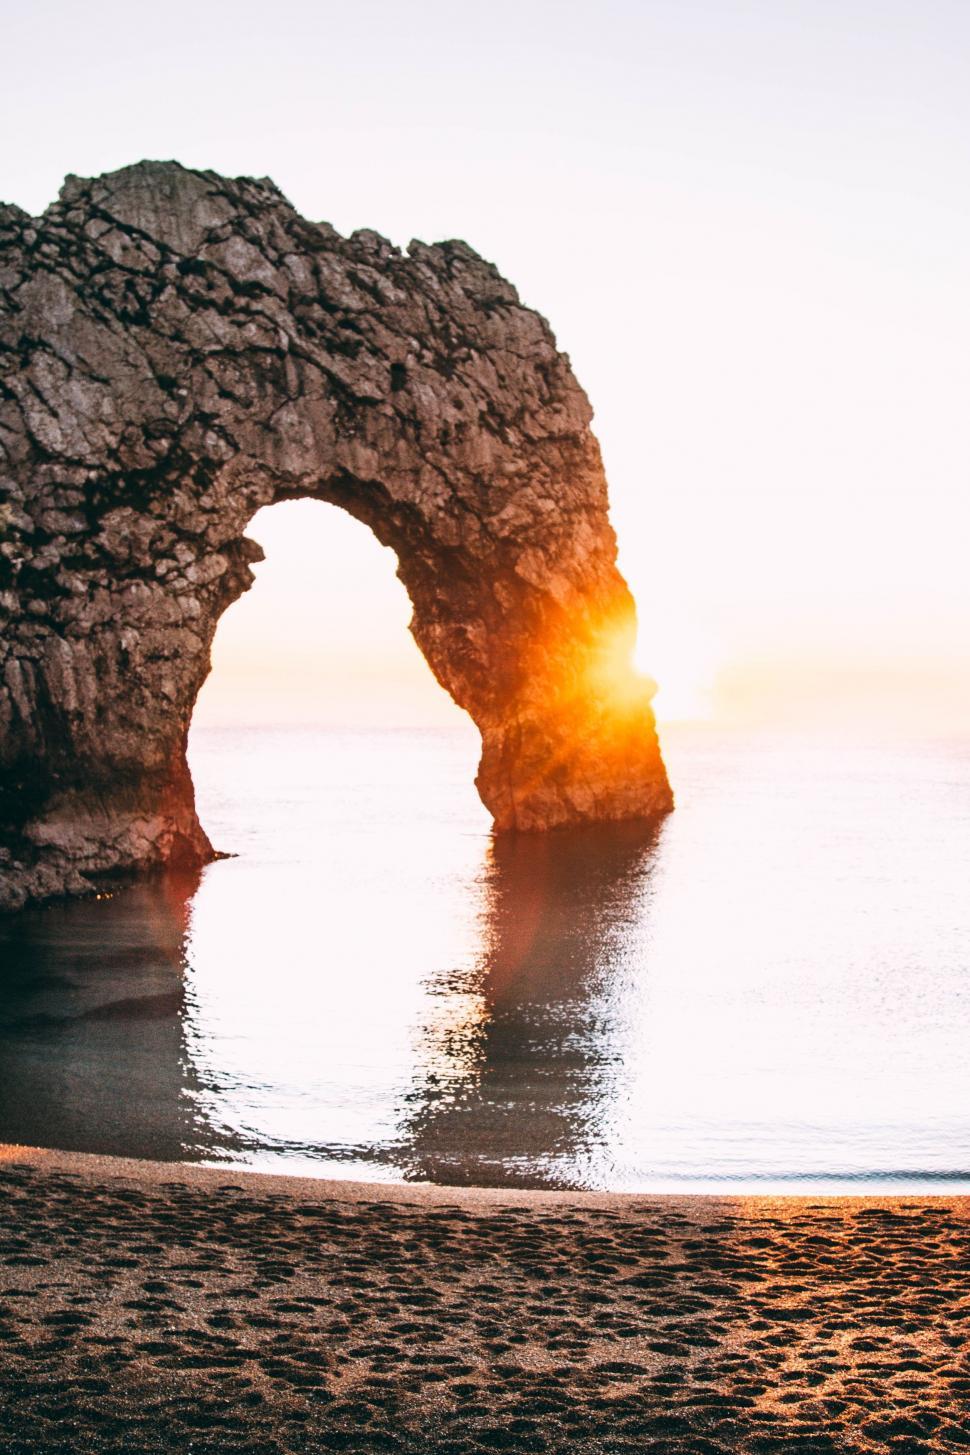 Free Image of Sun Setting Behind Rock Formation on Beach 